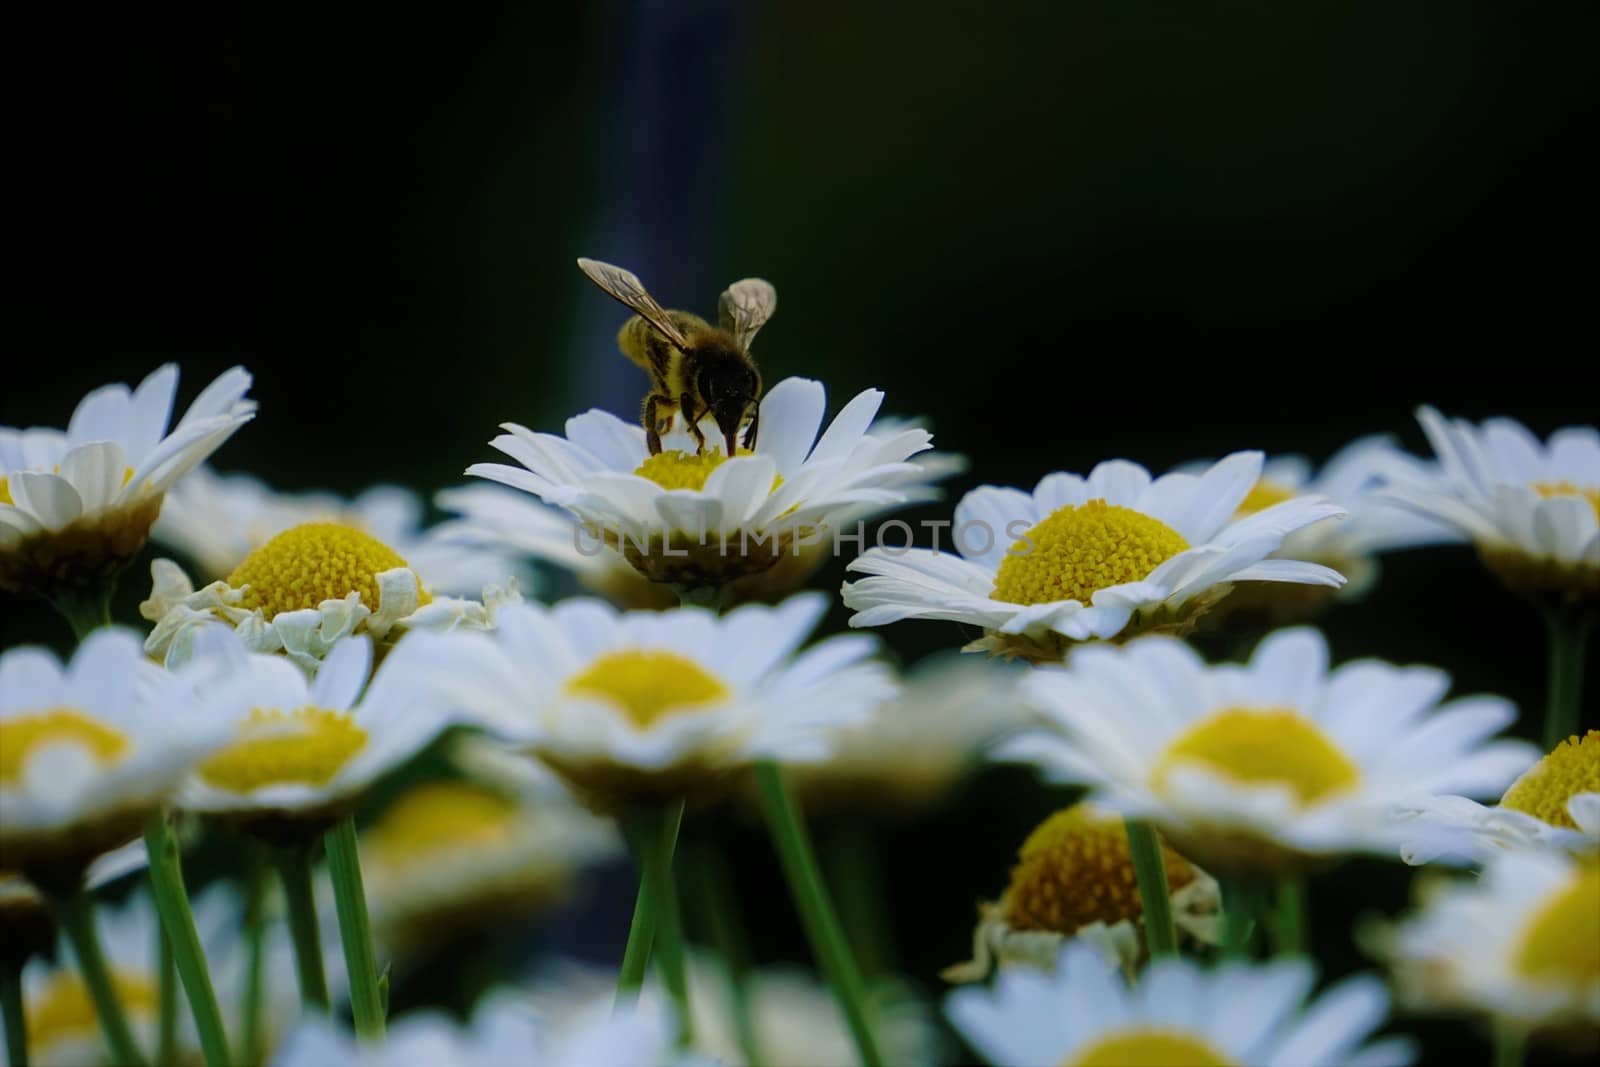 Bee on Leucanthemum blossom collecting pollen by pisces2386